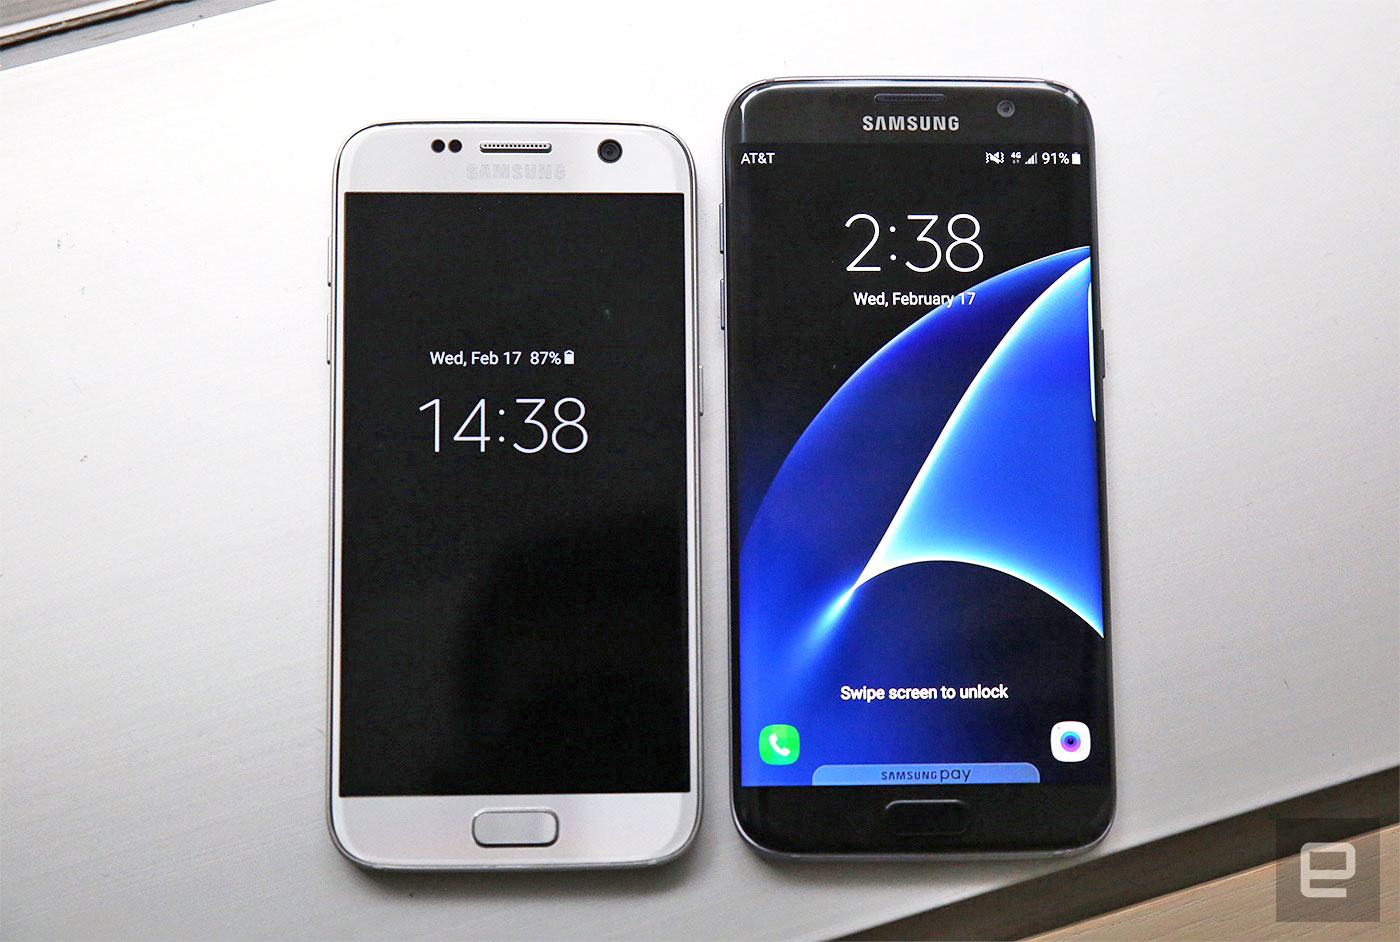 The Galaxy S7 and S7 Edge are beautiful, if unsurprising sequels